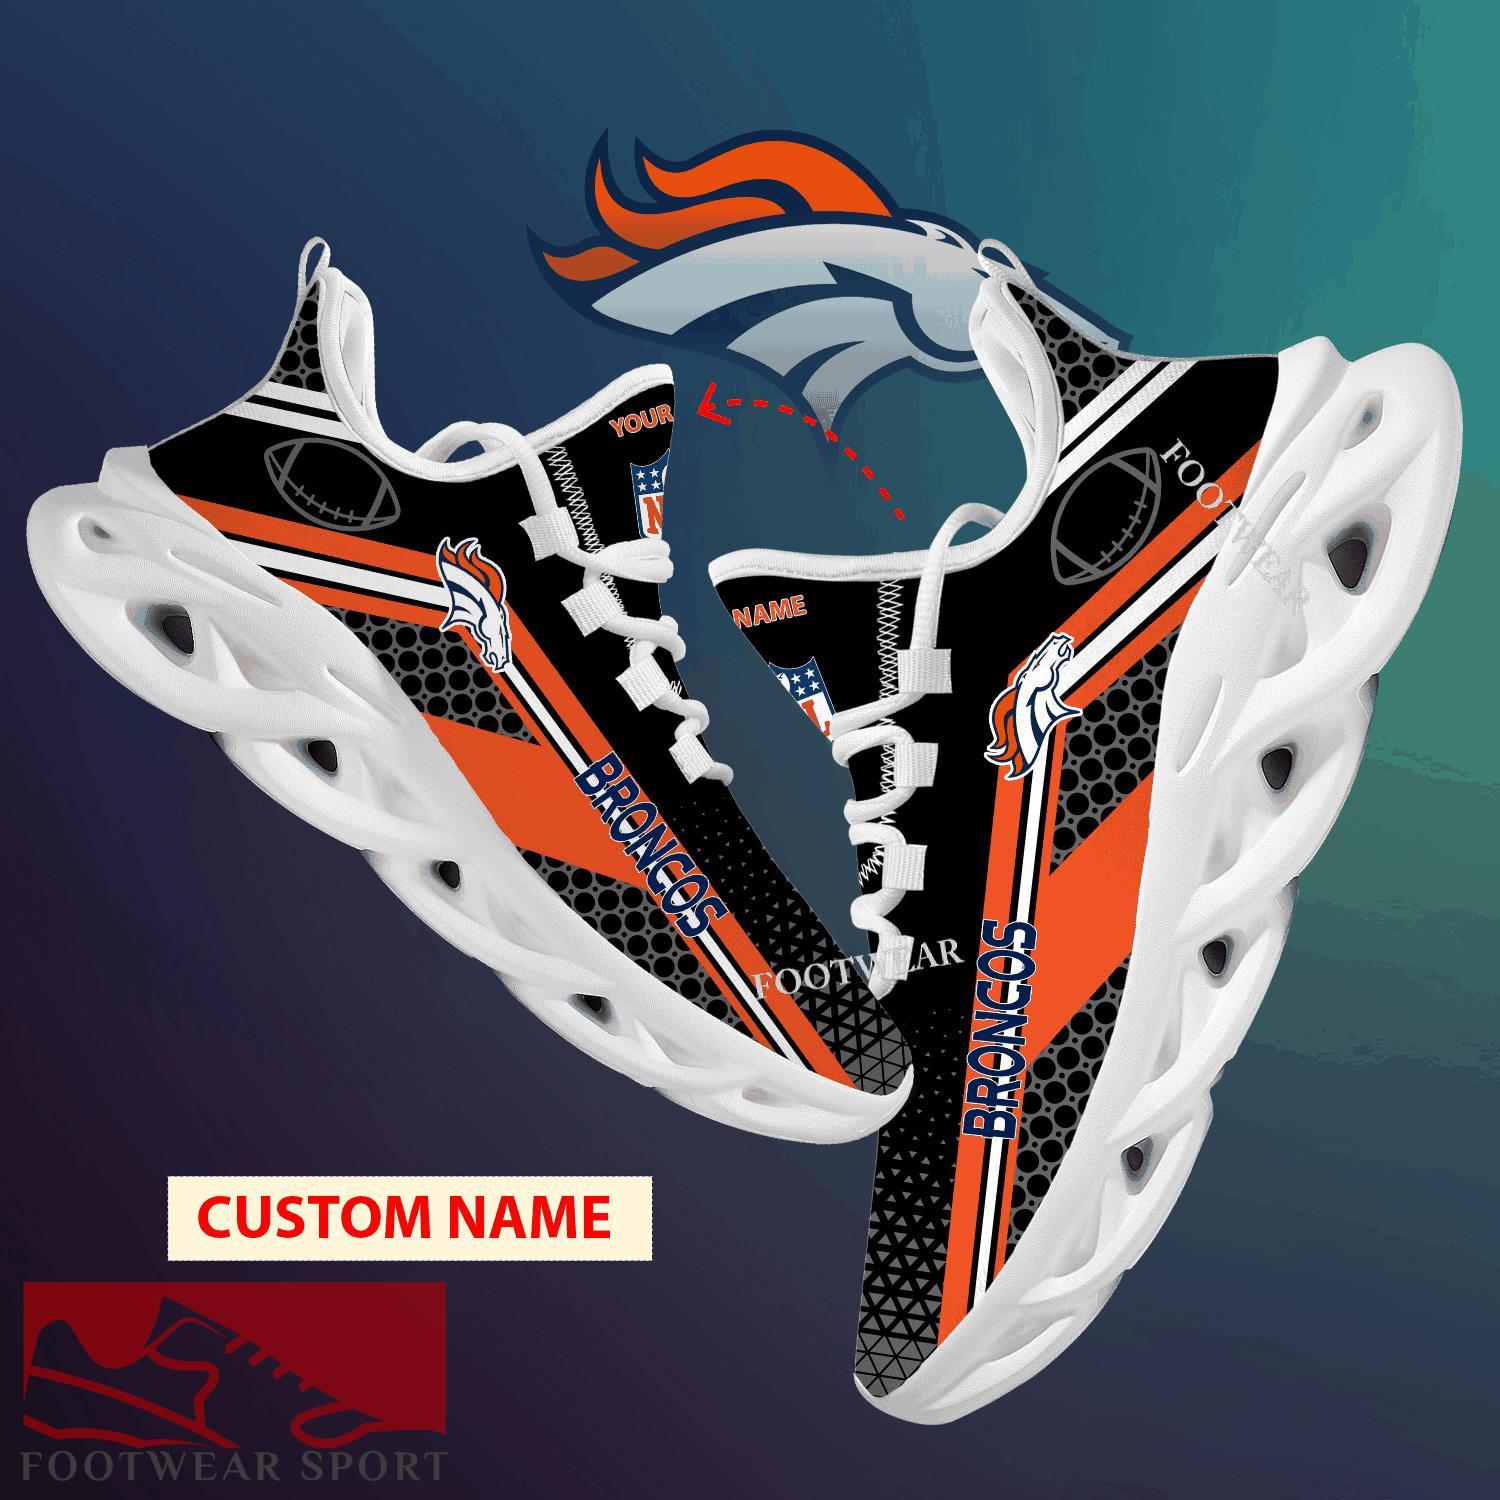 Denver Broncos Max Soul Shoes New Season Personalized For Men Women Chunky Sneaker Signature Fans - NFL Denver Broncos Max Soul Shoes New Season Personalized Photo 1